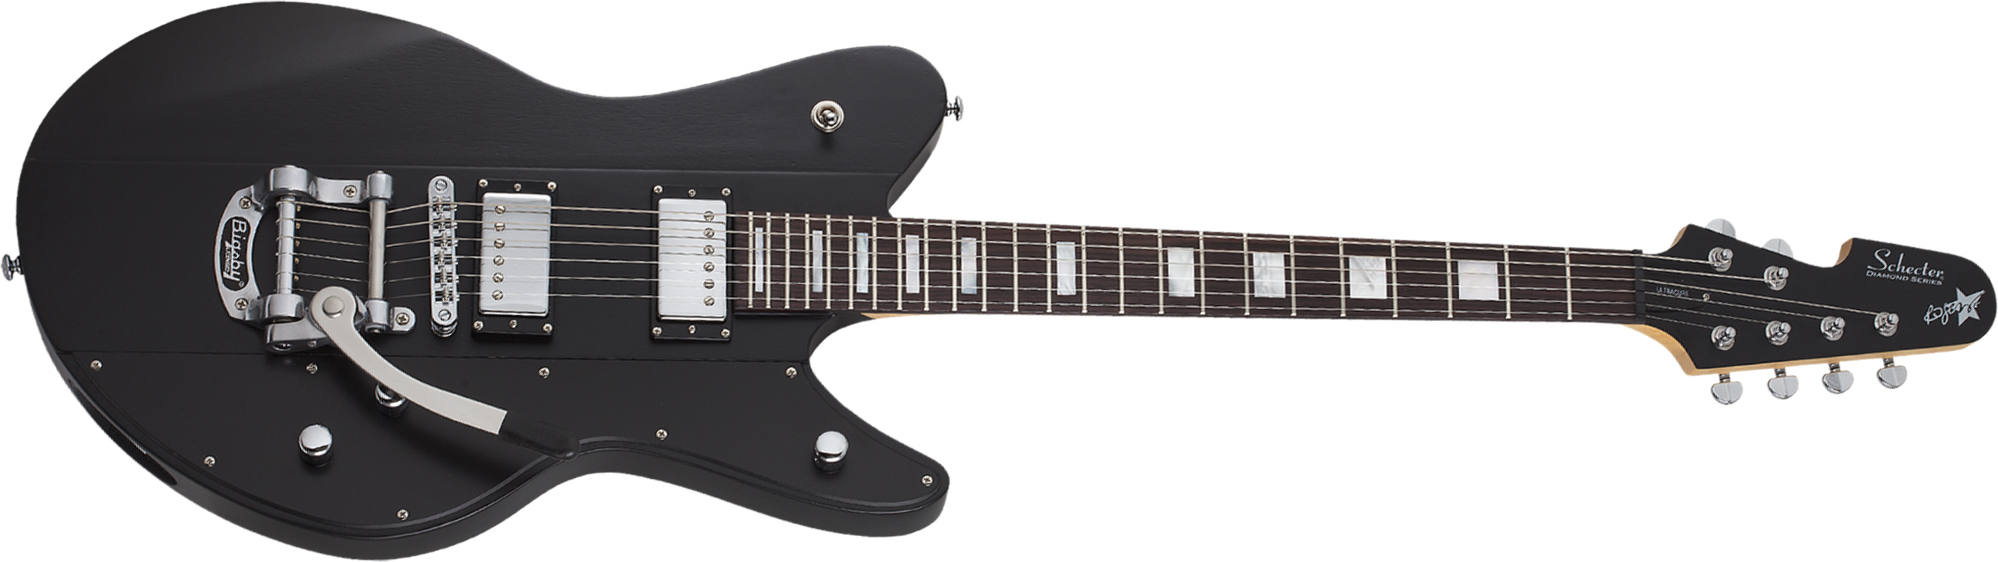 Schecter Robert Smith Ultra Cure Signature 2h Trem Bigsby Rw - Black Pearl - Signature electric guitar - Main picture